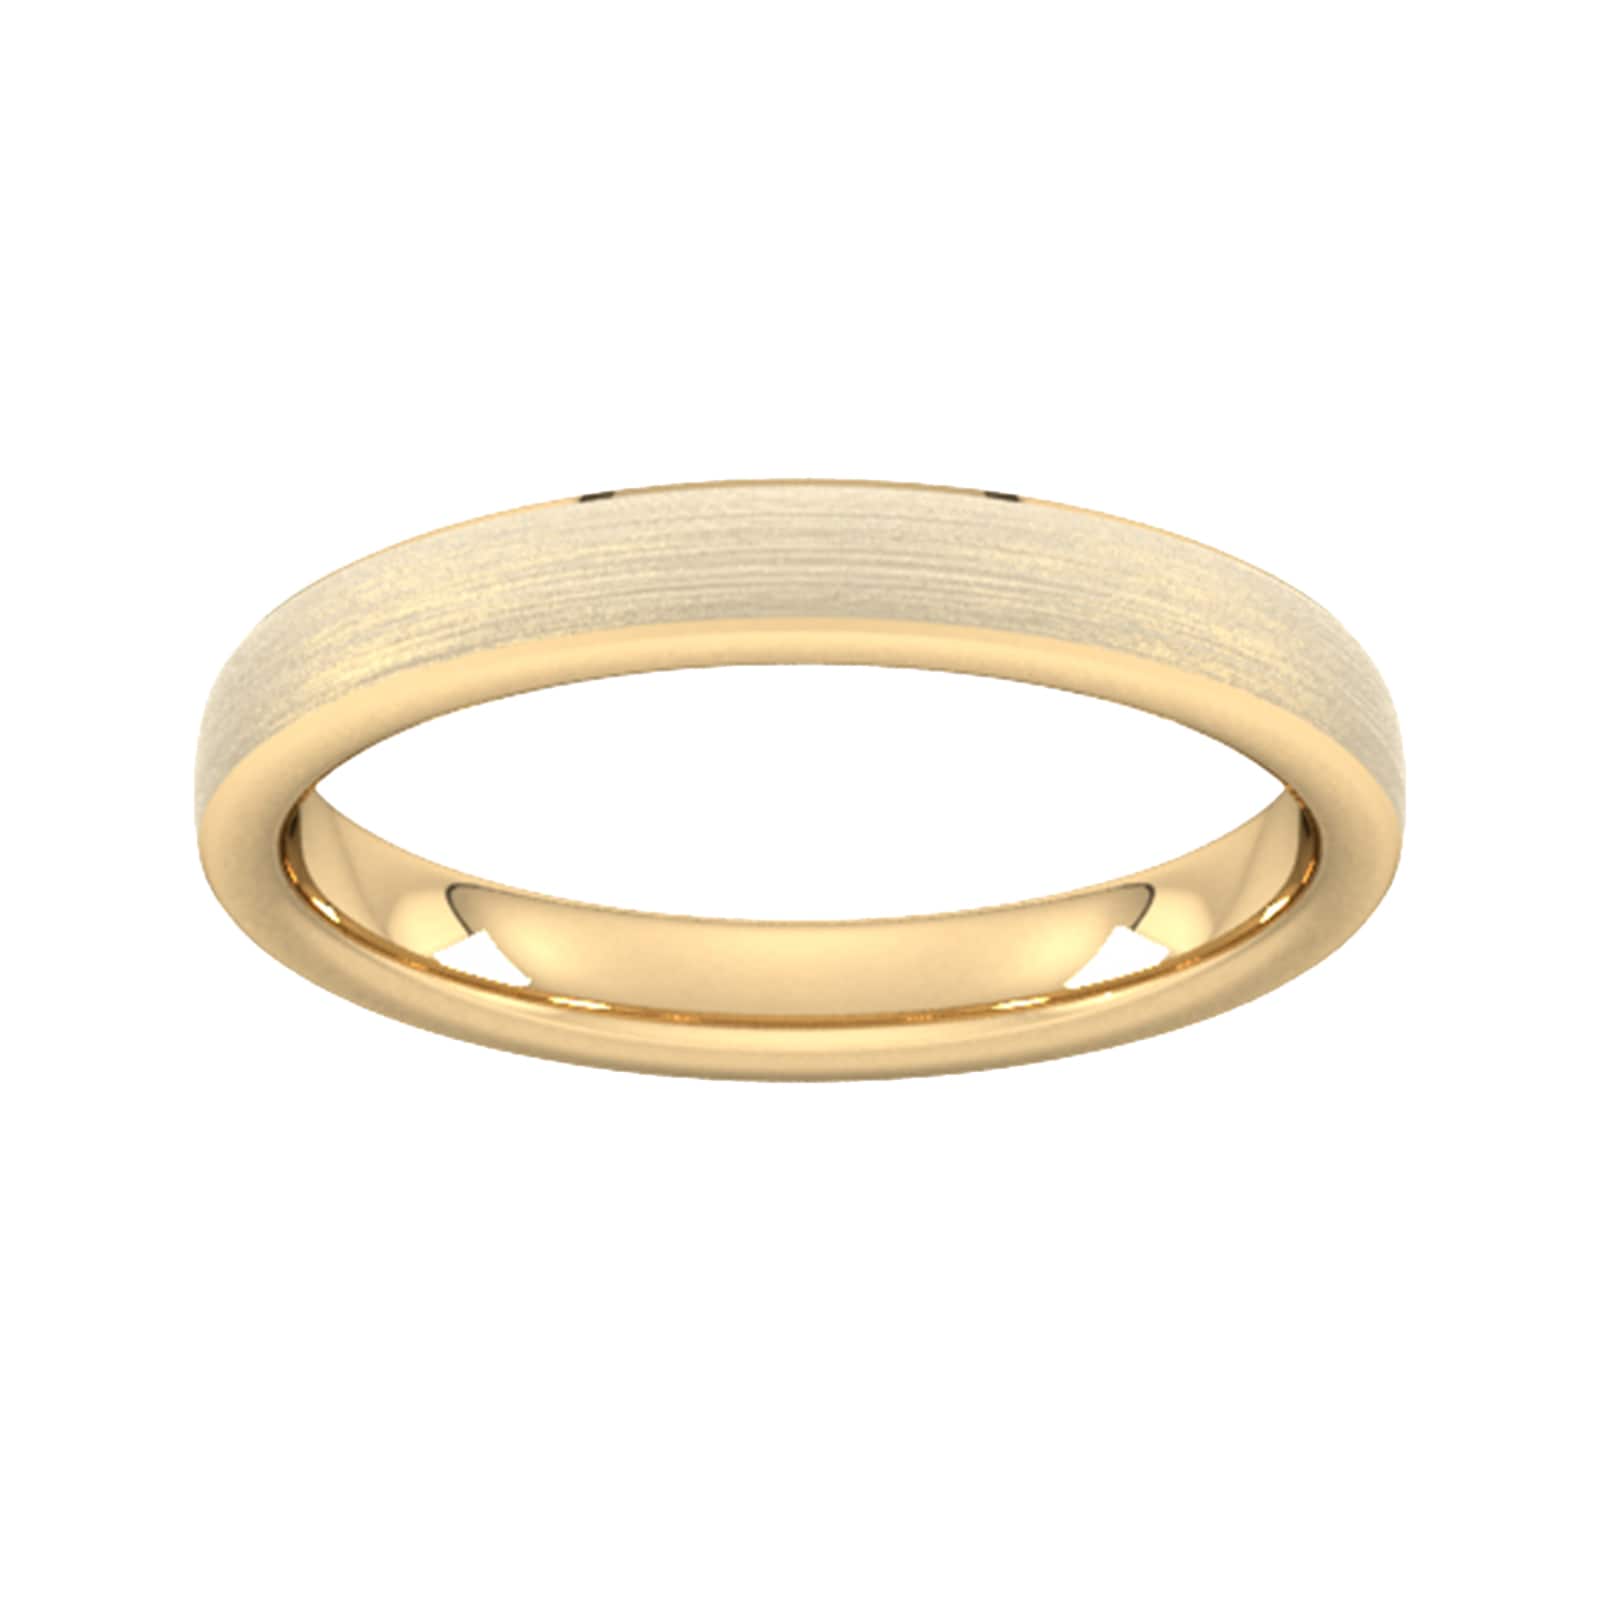 3mm Slight Court Standard Polished Chamfered Edges With Matt Centre Wedding Ring In 9 Carat Yellow Gold - Ring Size J